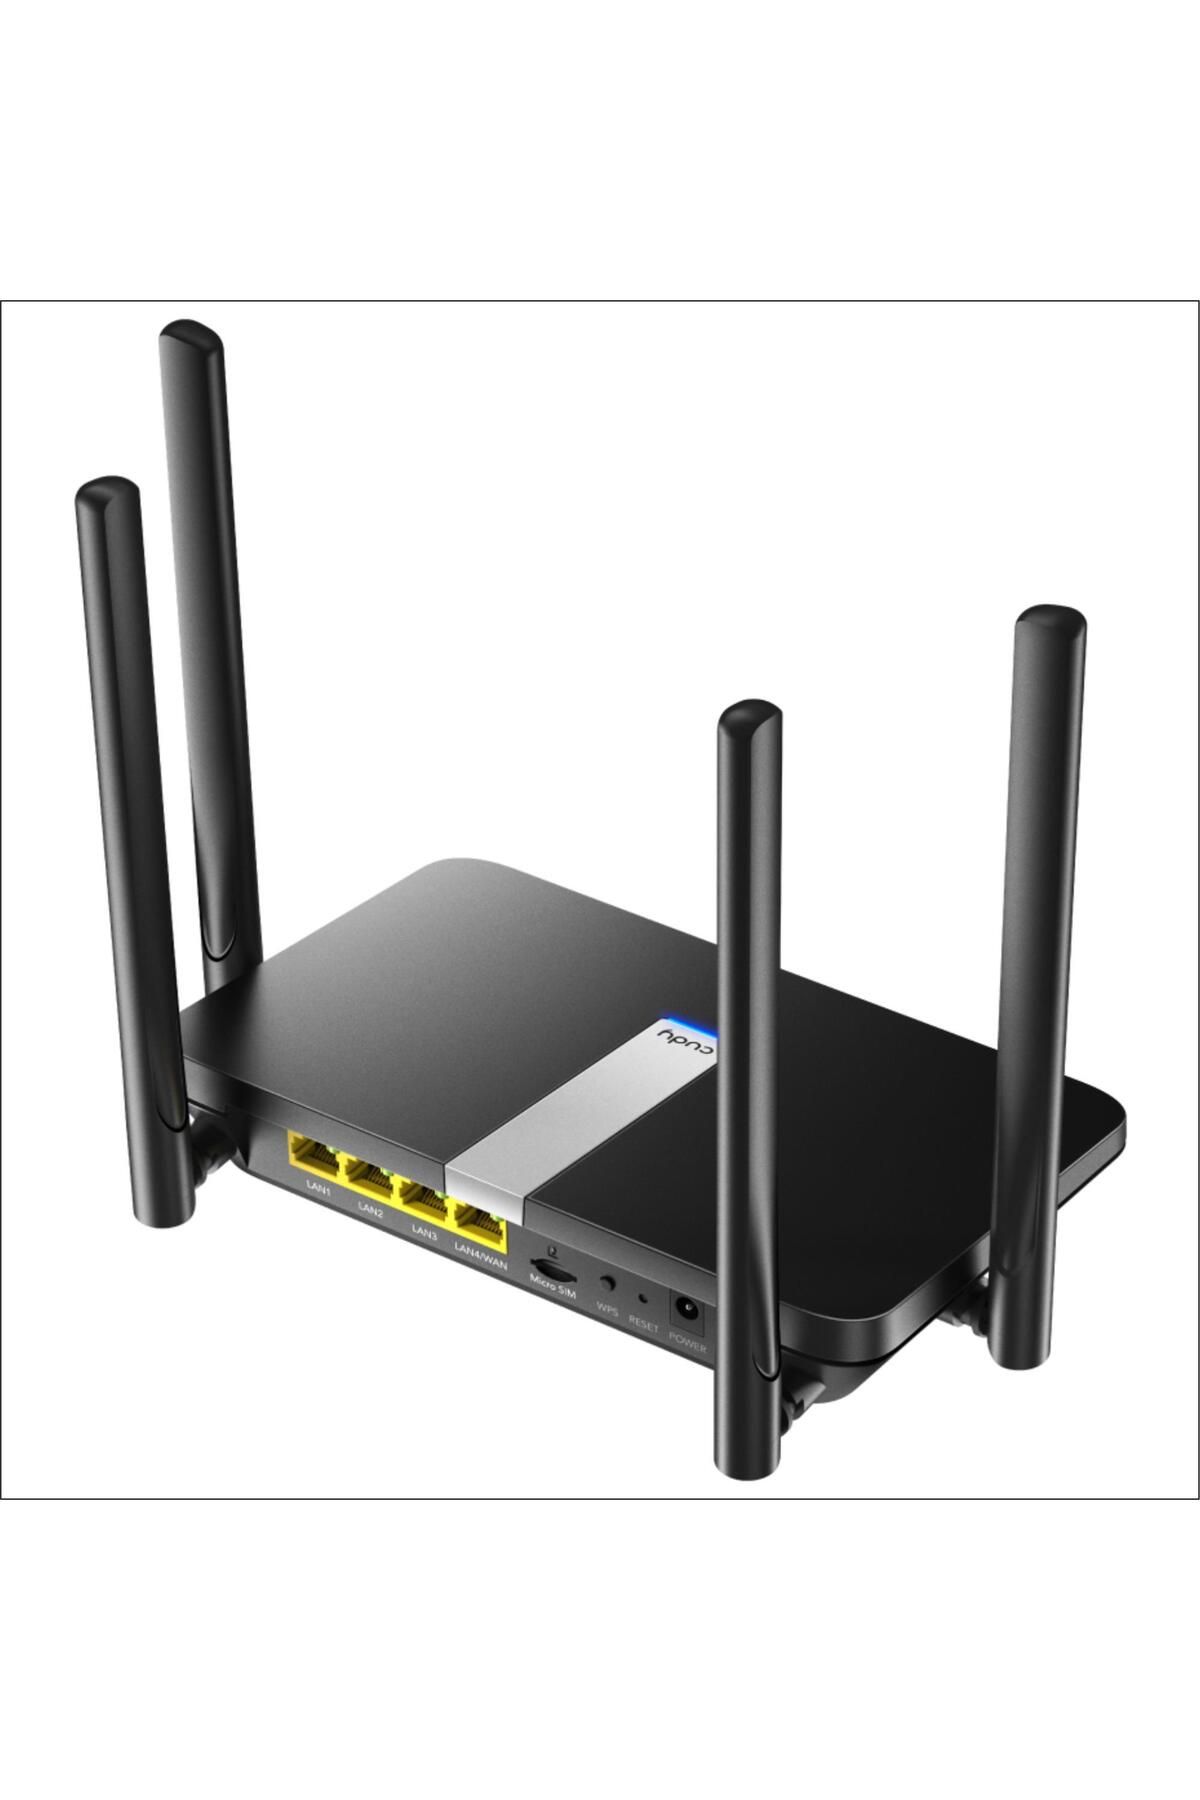 cudy LT500 2,4GHz 300Mbps, 5GHz 867Mbps, 4 Port Wi-Fi Mesh 4G LTE DDNS Router (AC1200 Serisi)